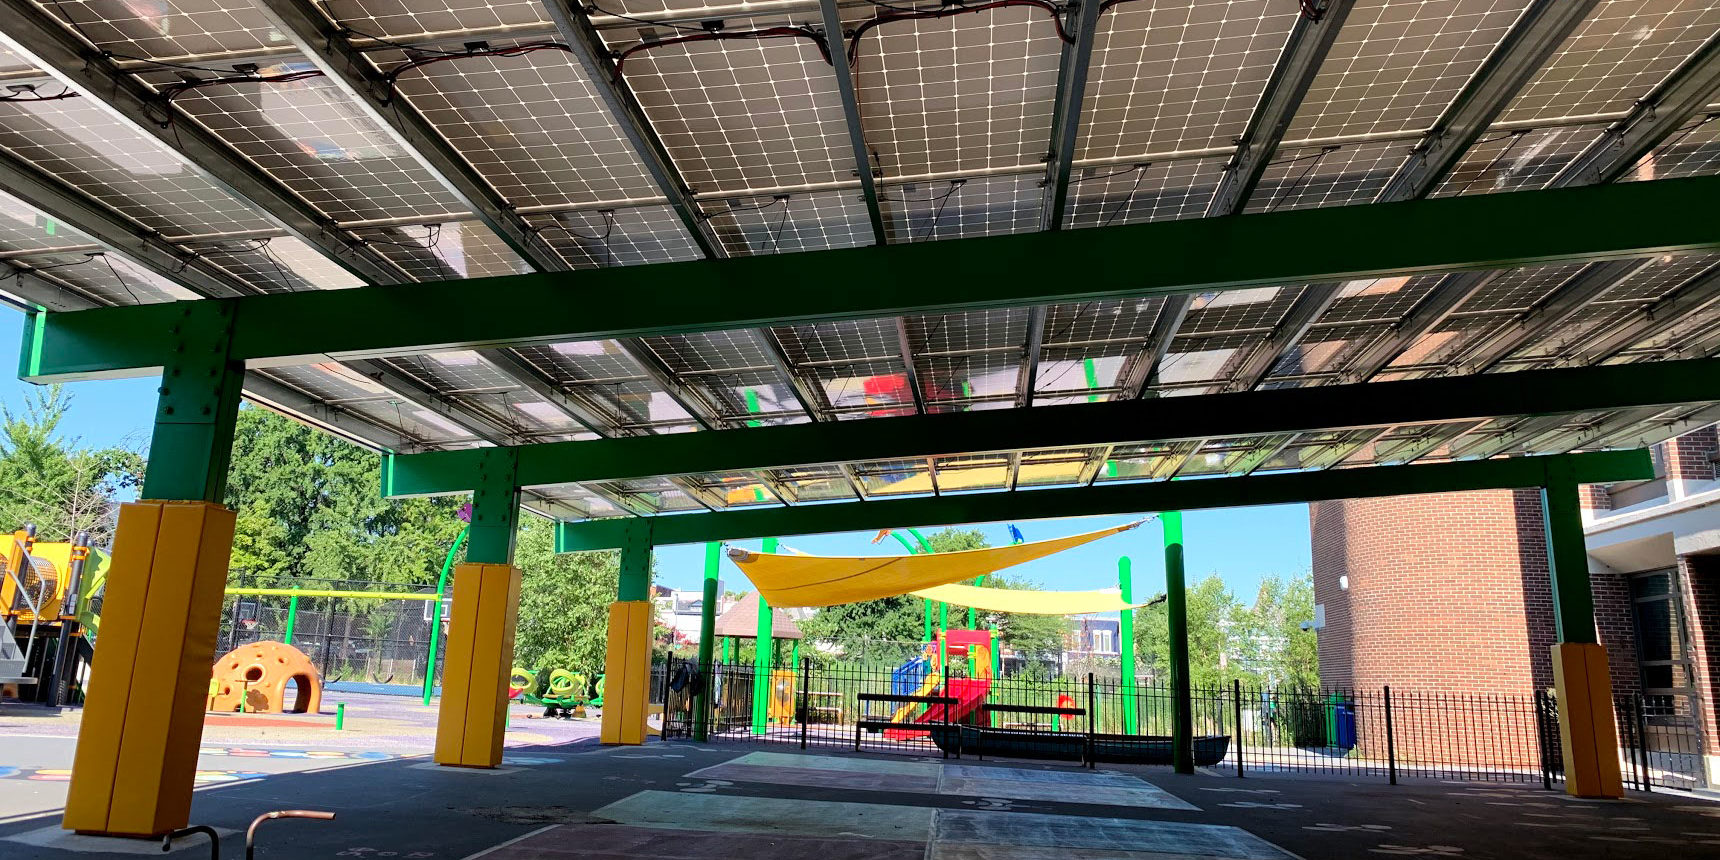 An eye-level view of Ludlow-Taylor Elementary School's solar panel roof. The photo appears to be taken under the roof and the four-square chalk area on the concrete is in front. Supportive pillars are on the left as well as a playground. Another playground set is in the backdrop behind a short iron fence. To the right is a brick building and further behind are trees, buildings, and a clear, sunny sky.